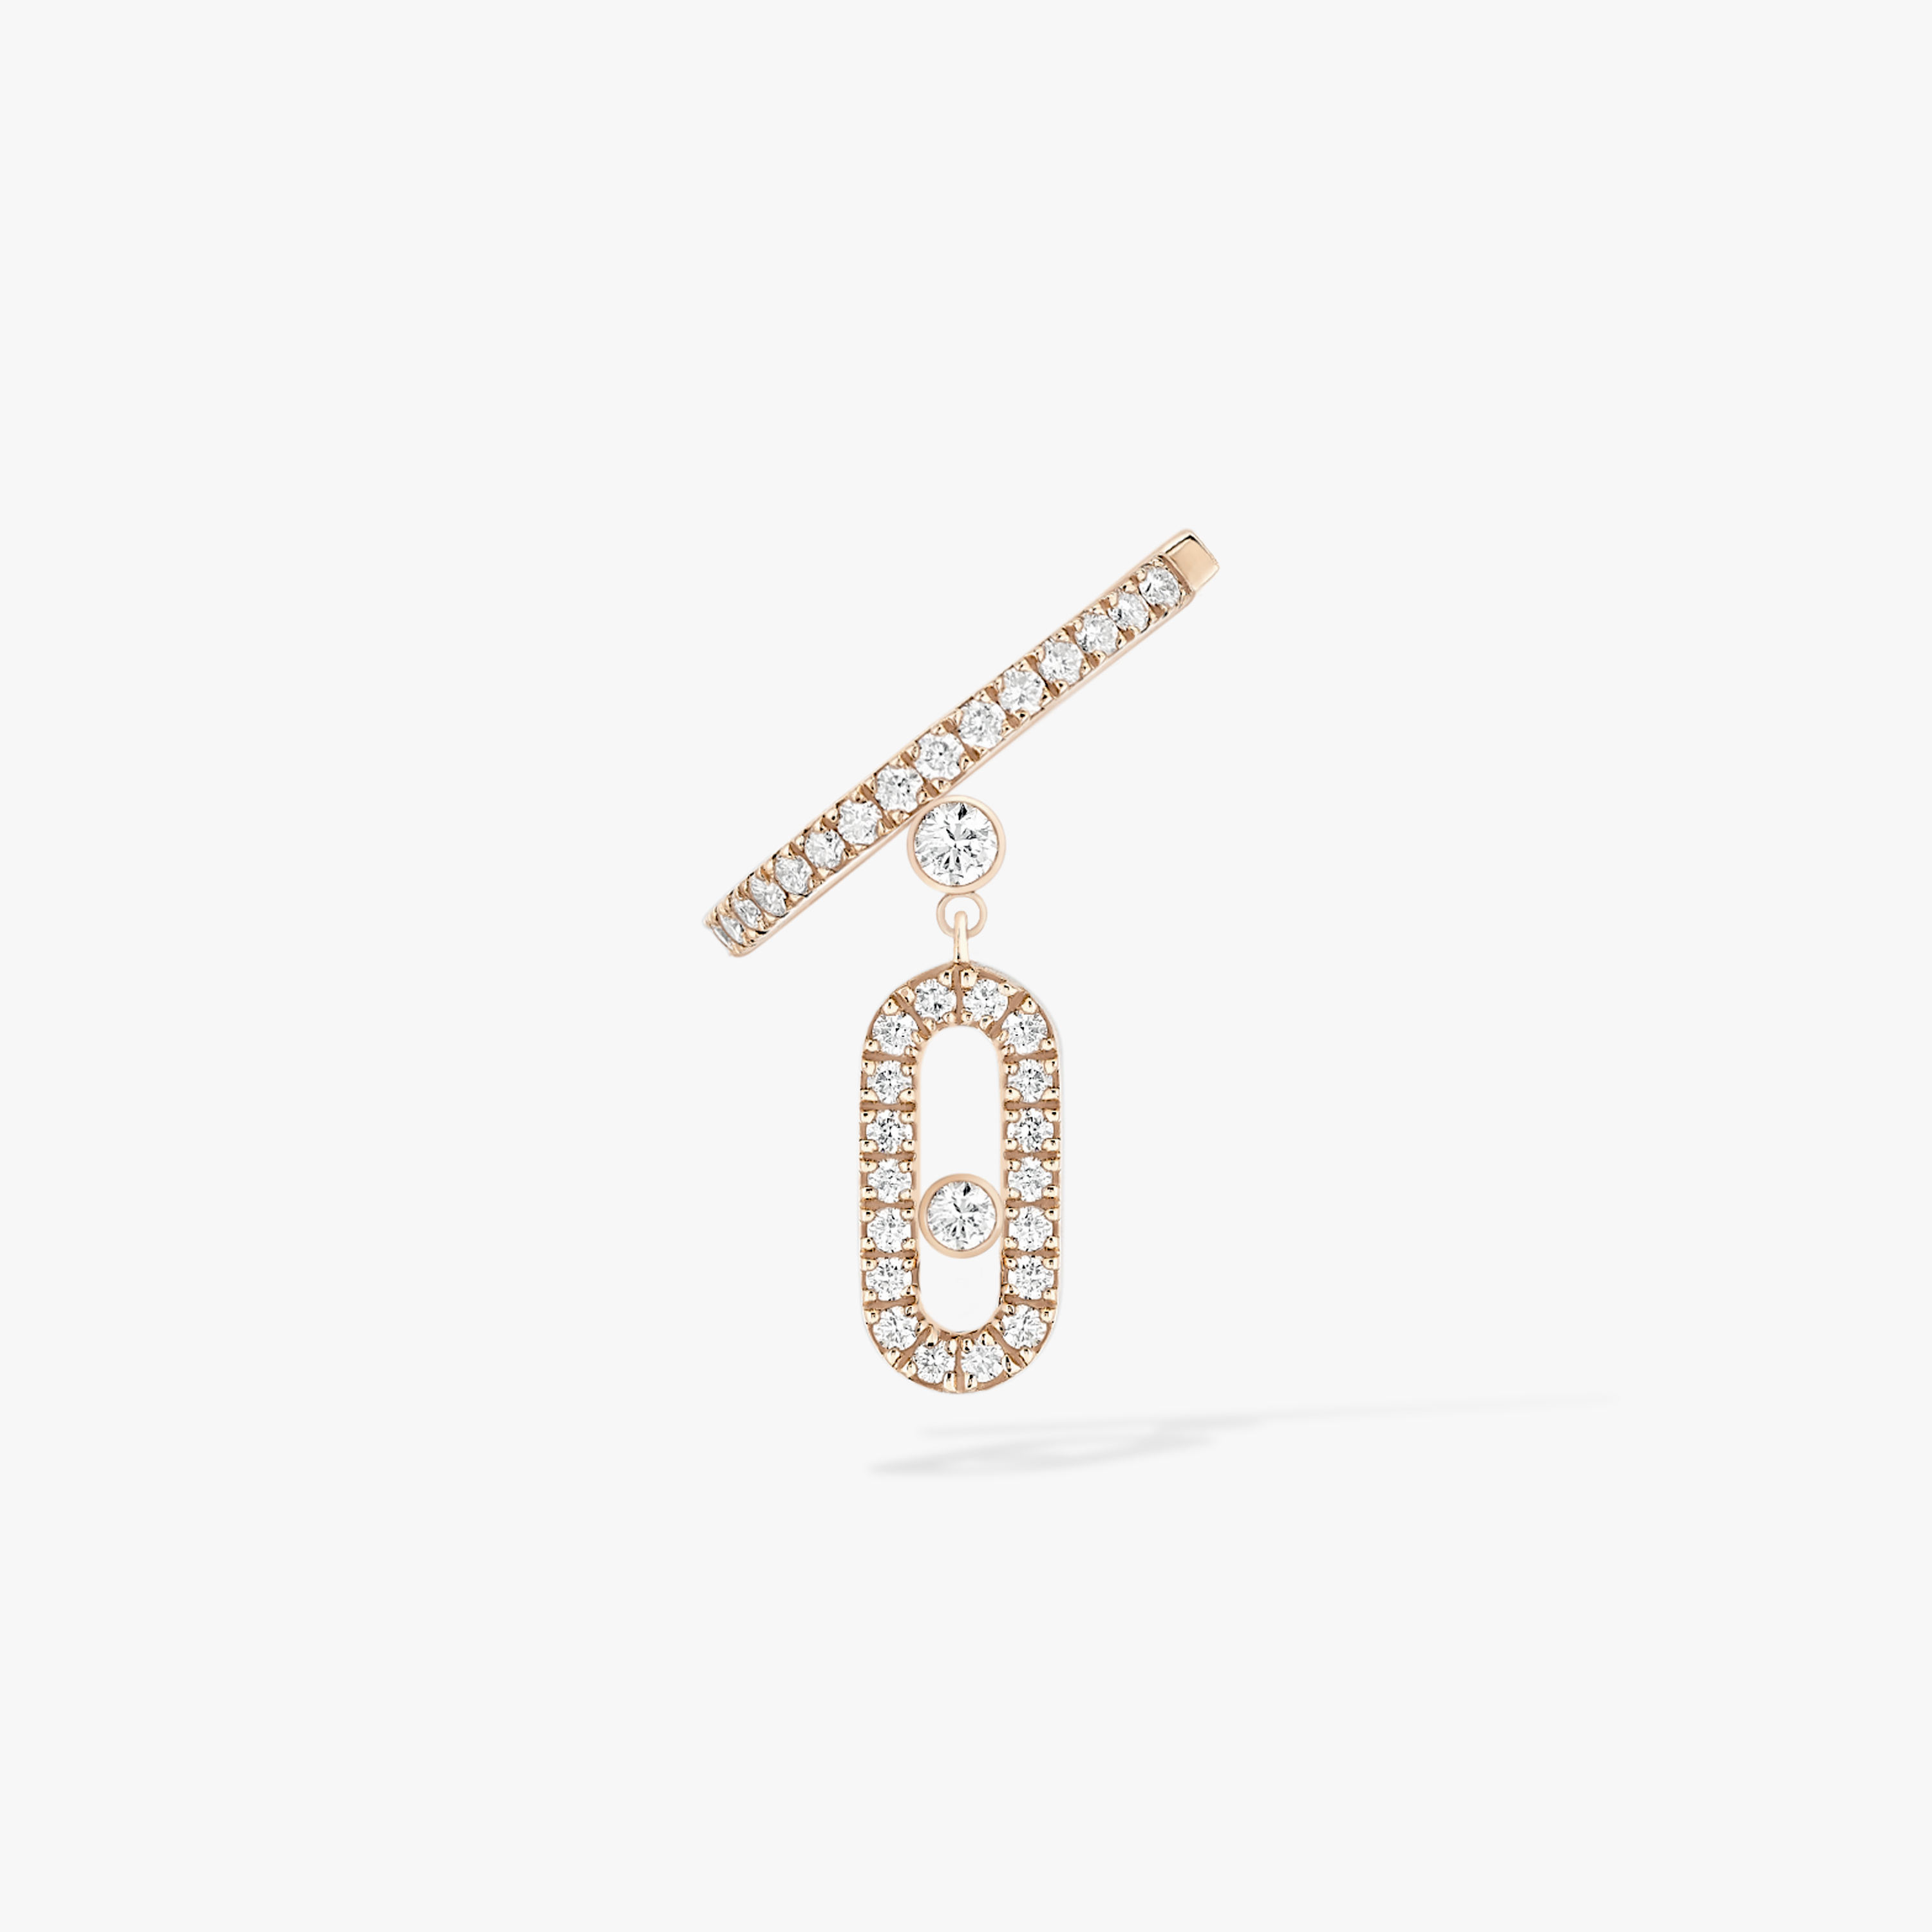 Earrings For Her Pink Gold Diamond Move Uno Single Clip Pavé Drop Pendant 11162-PG